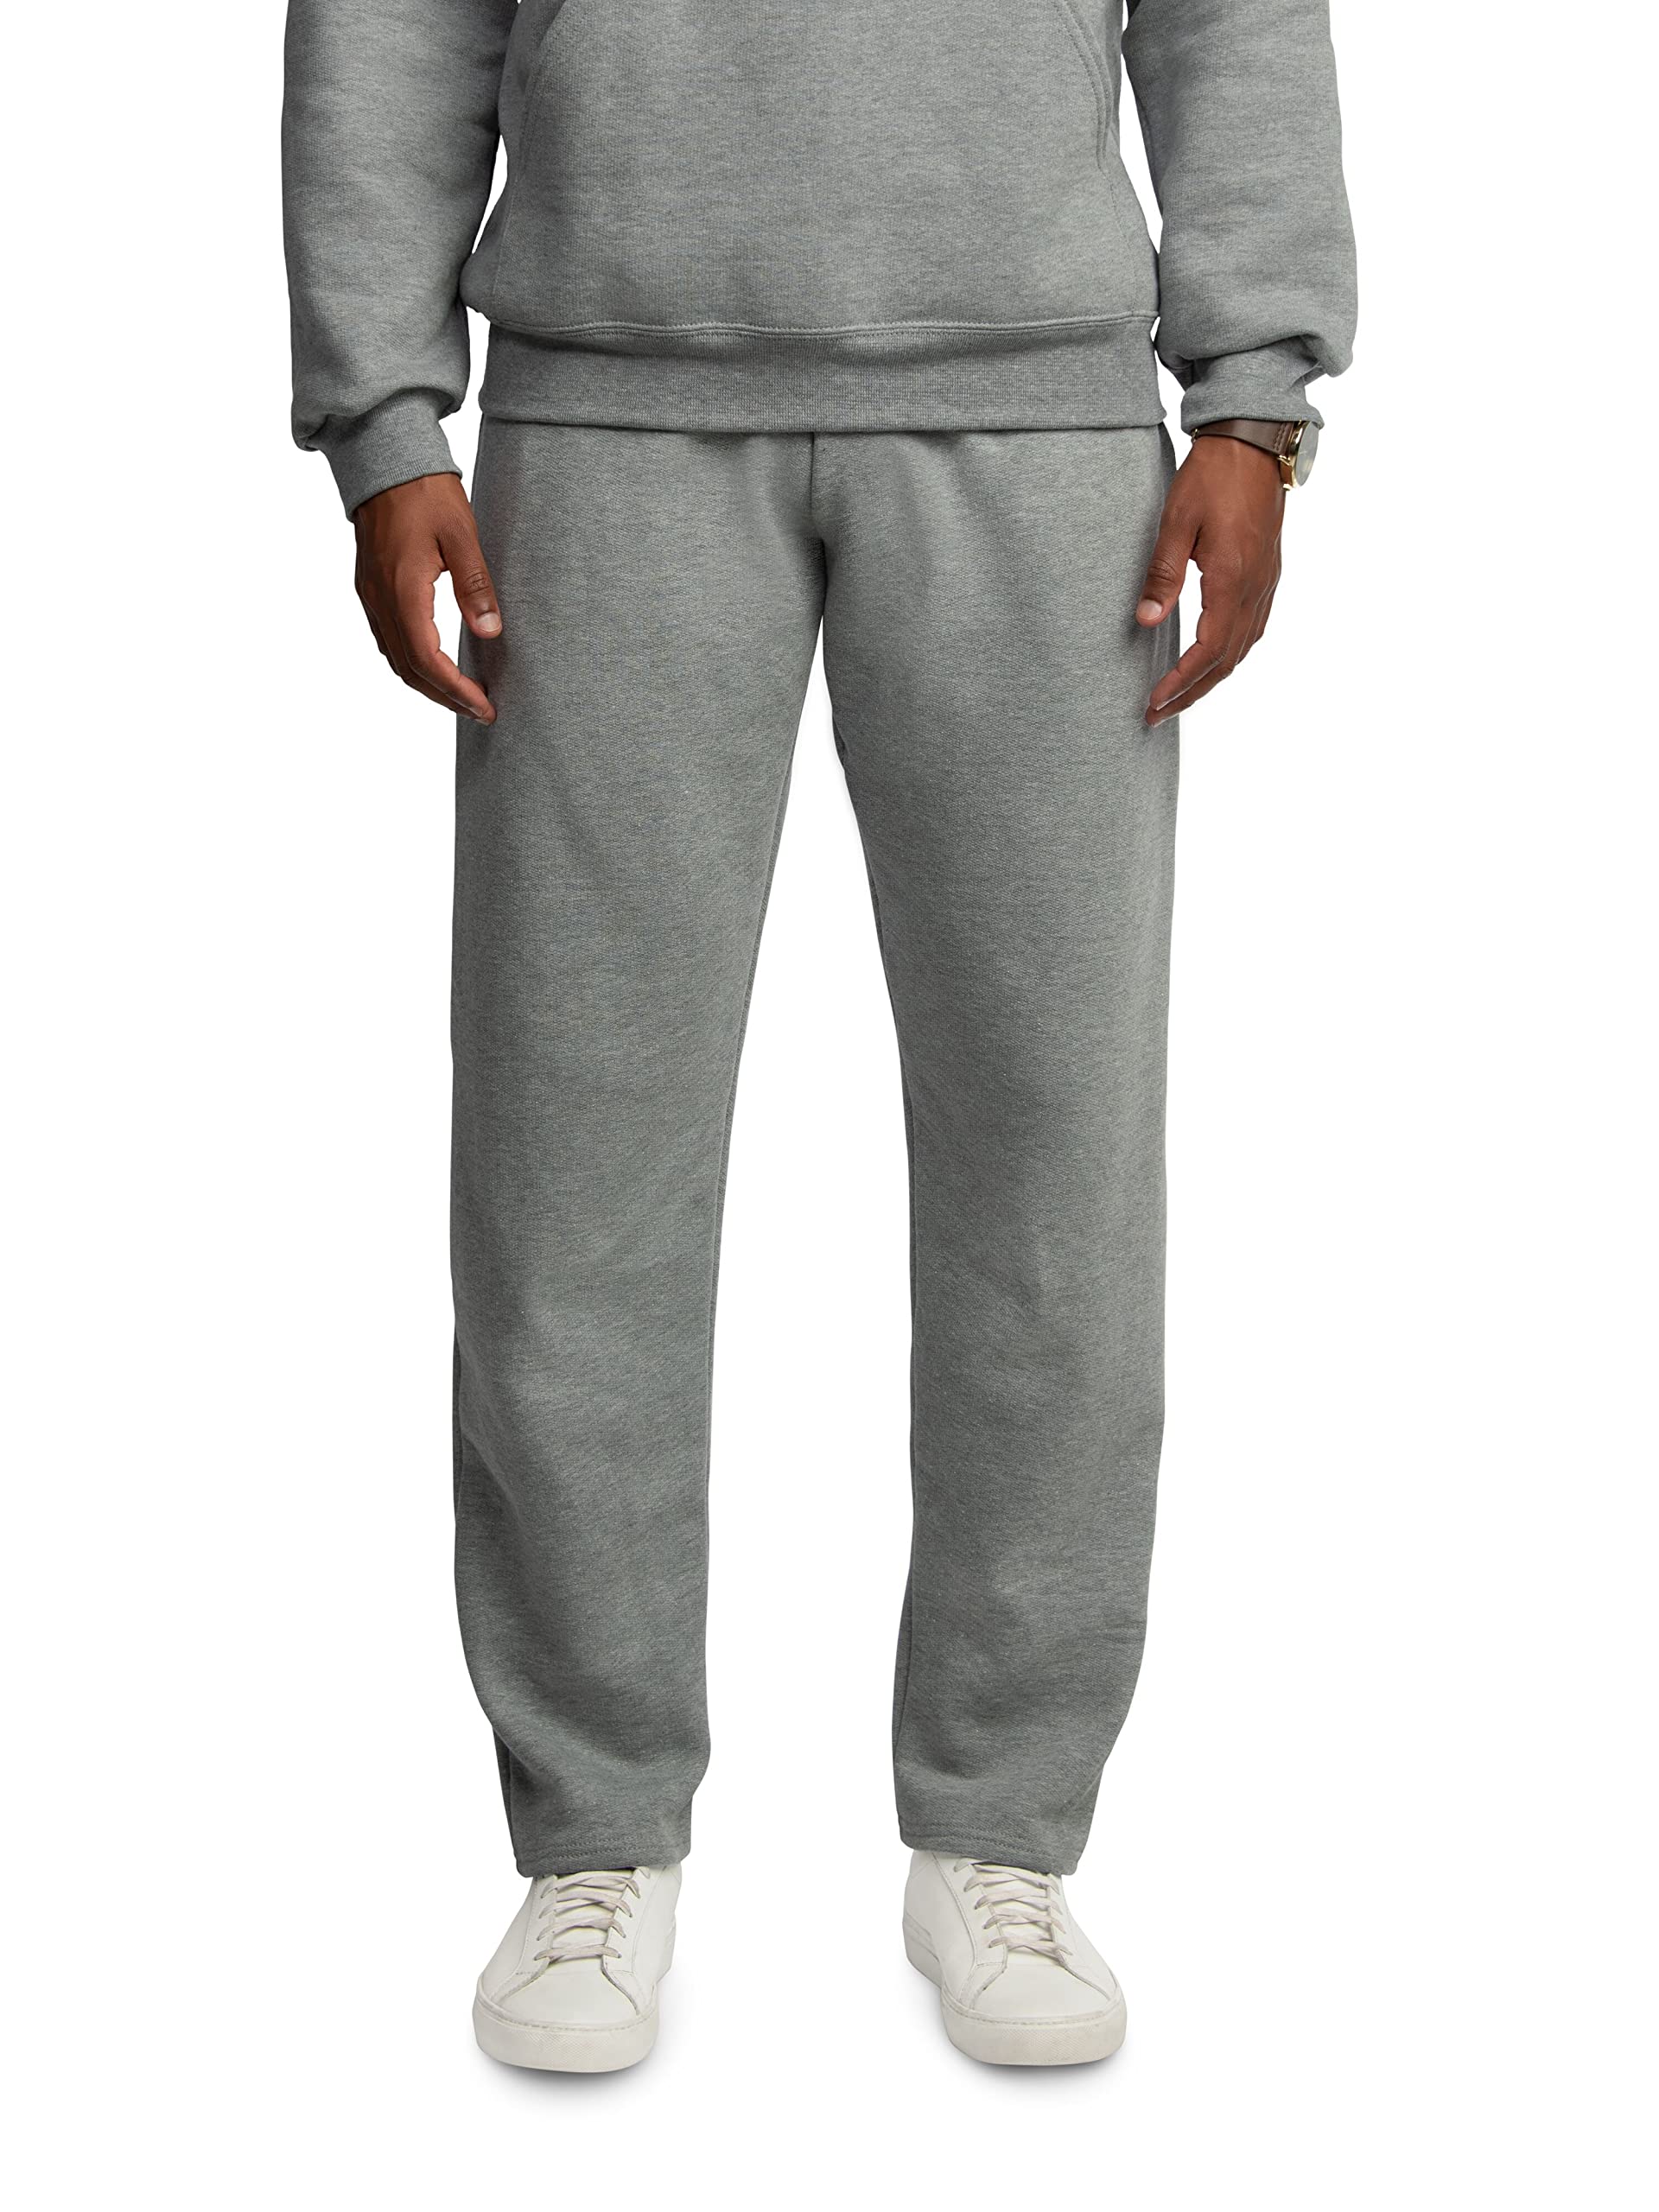 Fruit of the Loom Eversoft Fleece Open Bottom Sweatpants with Pockets, Relaxed Fit, Moisture Wicking, Breathable